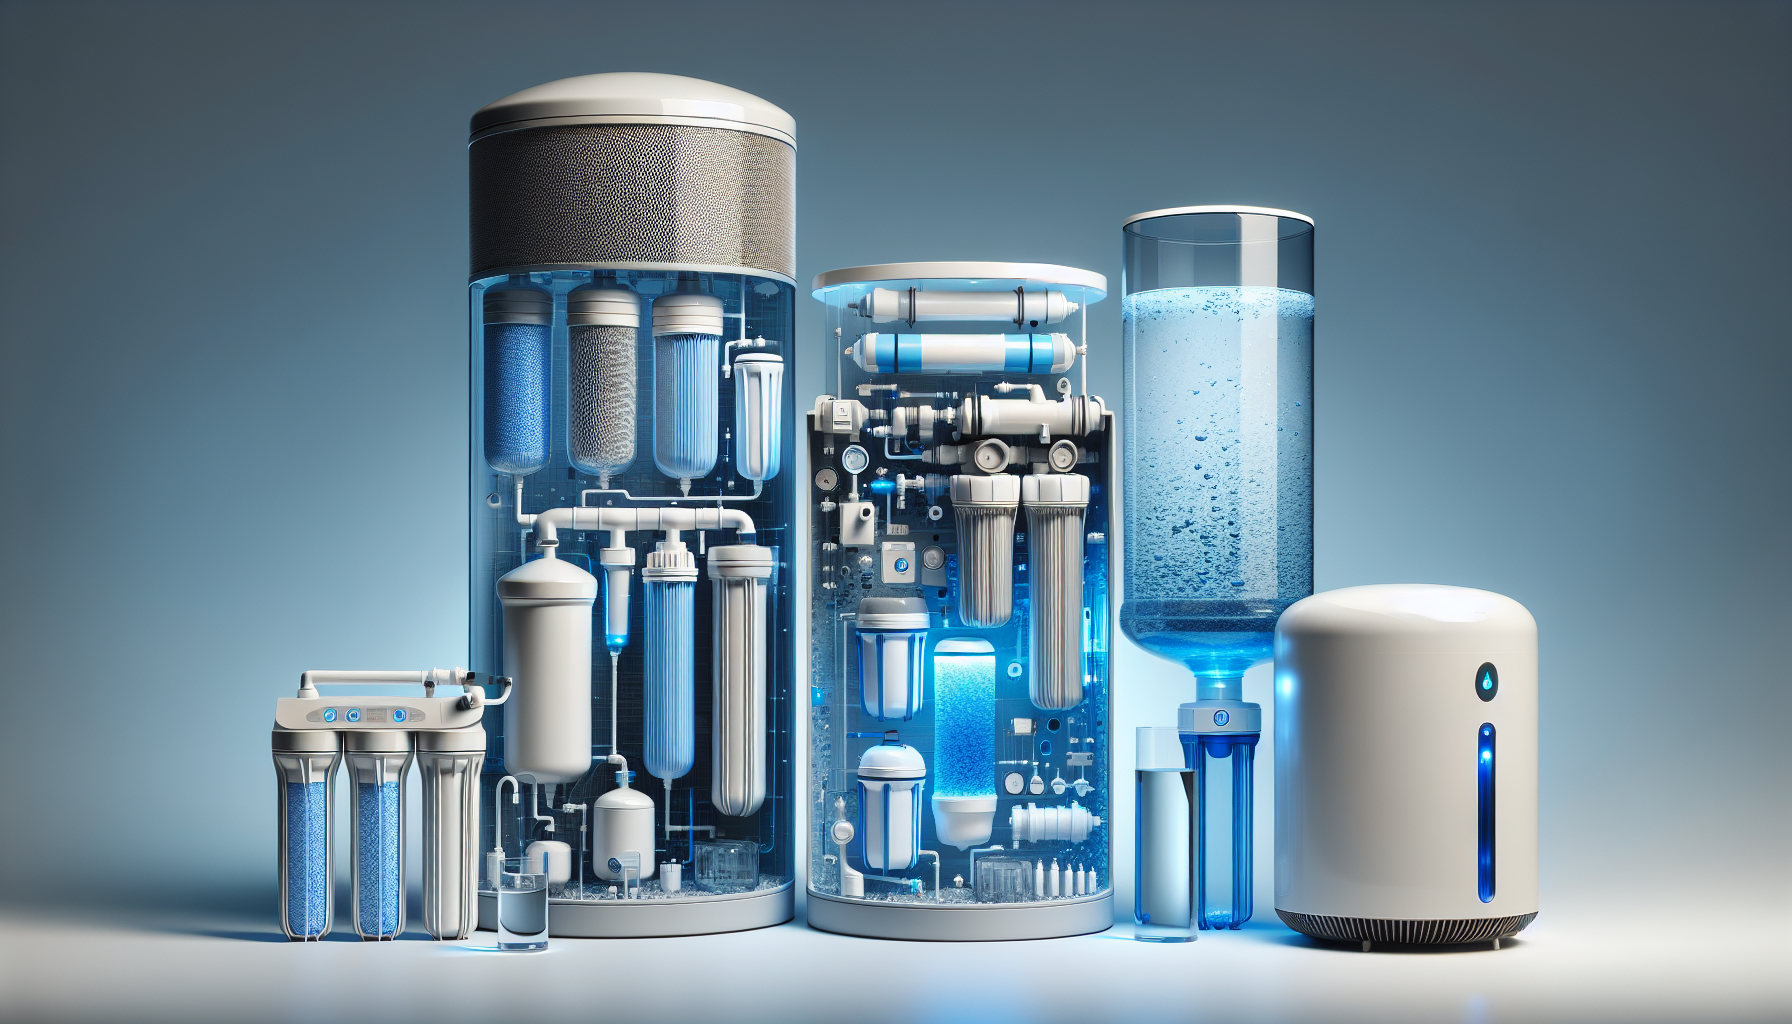 Illustration of various water filtration systems